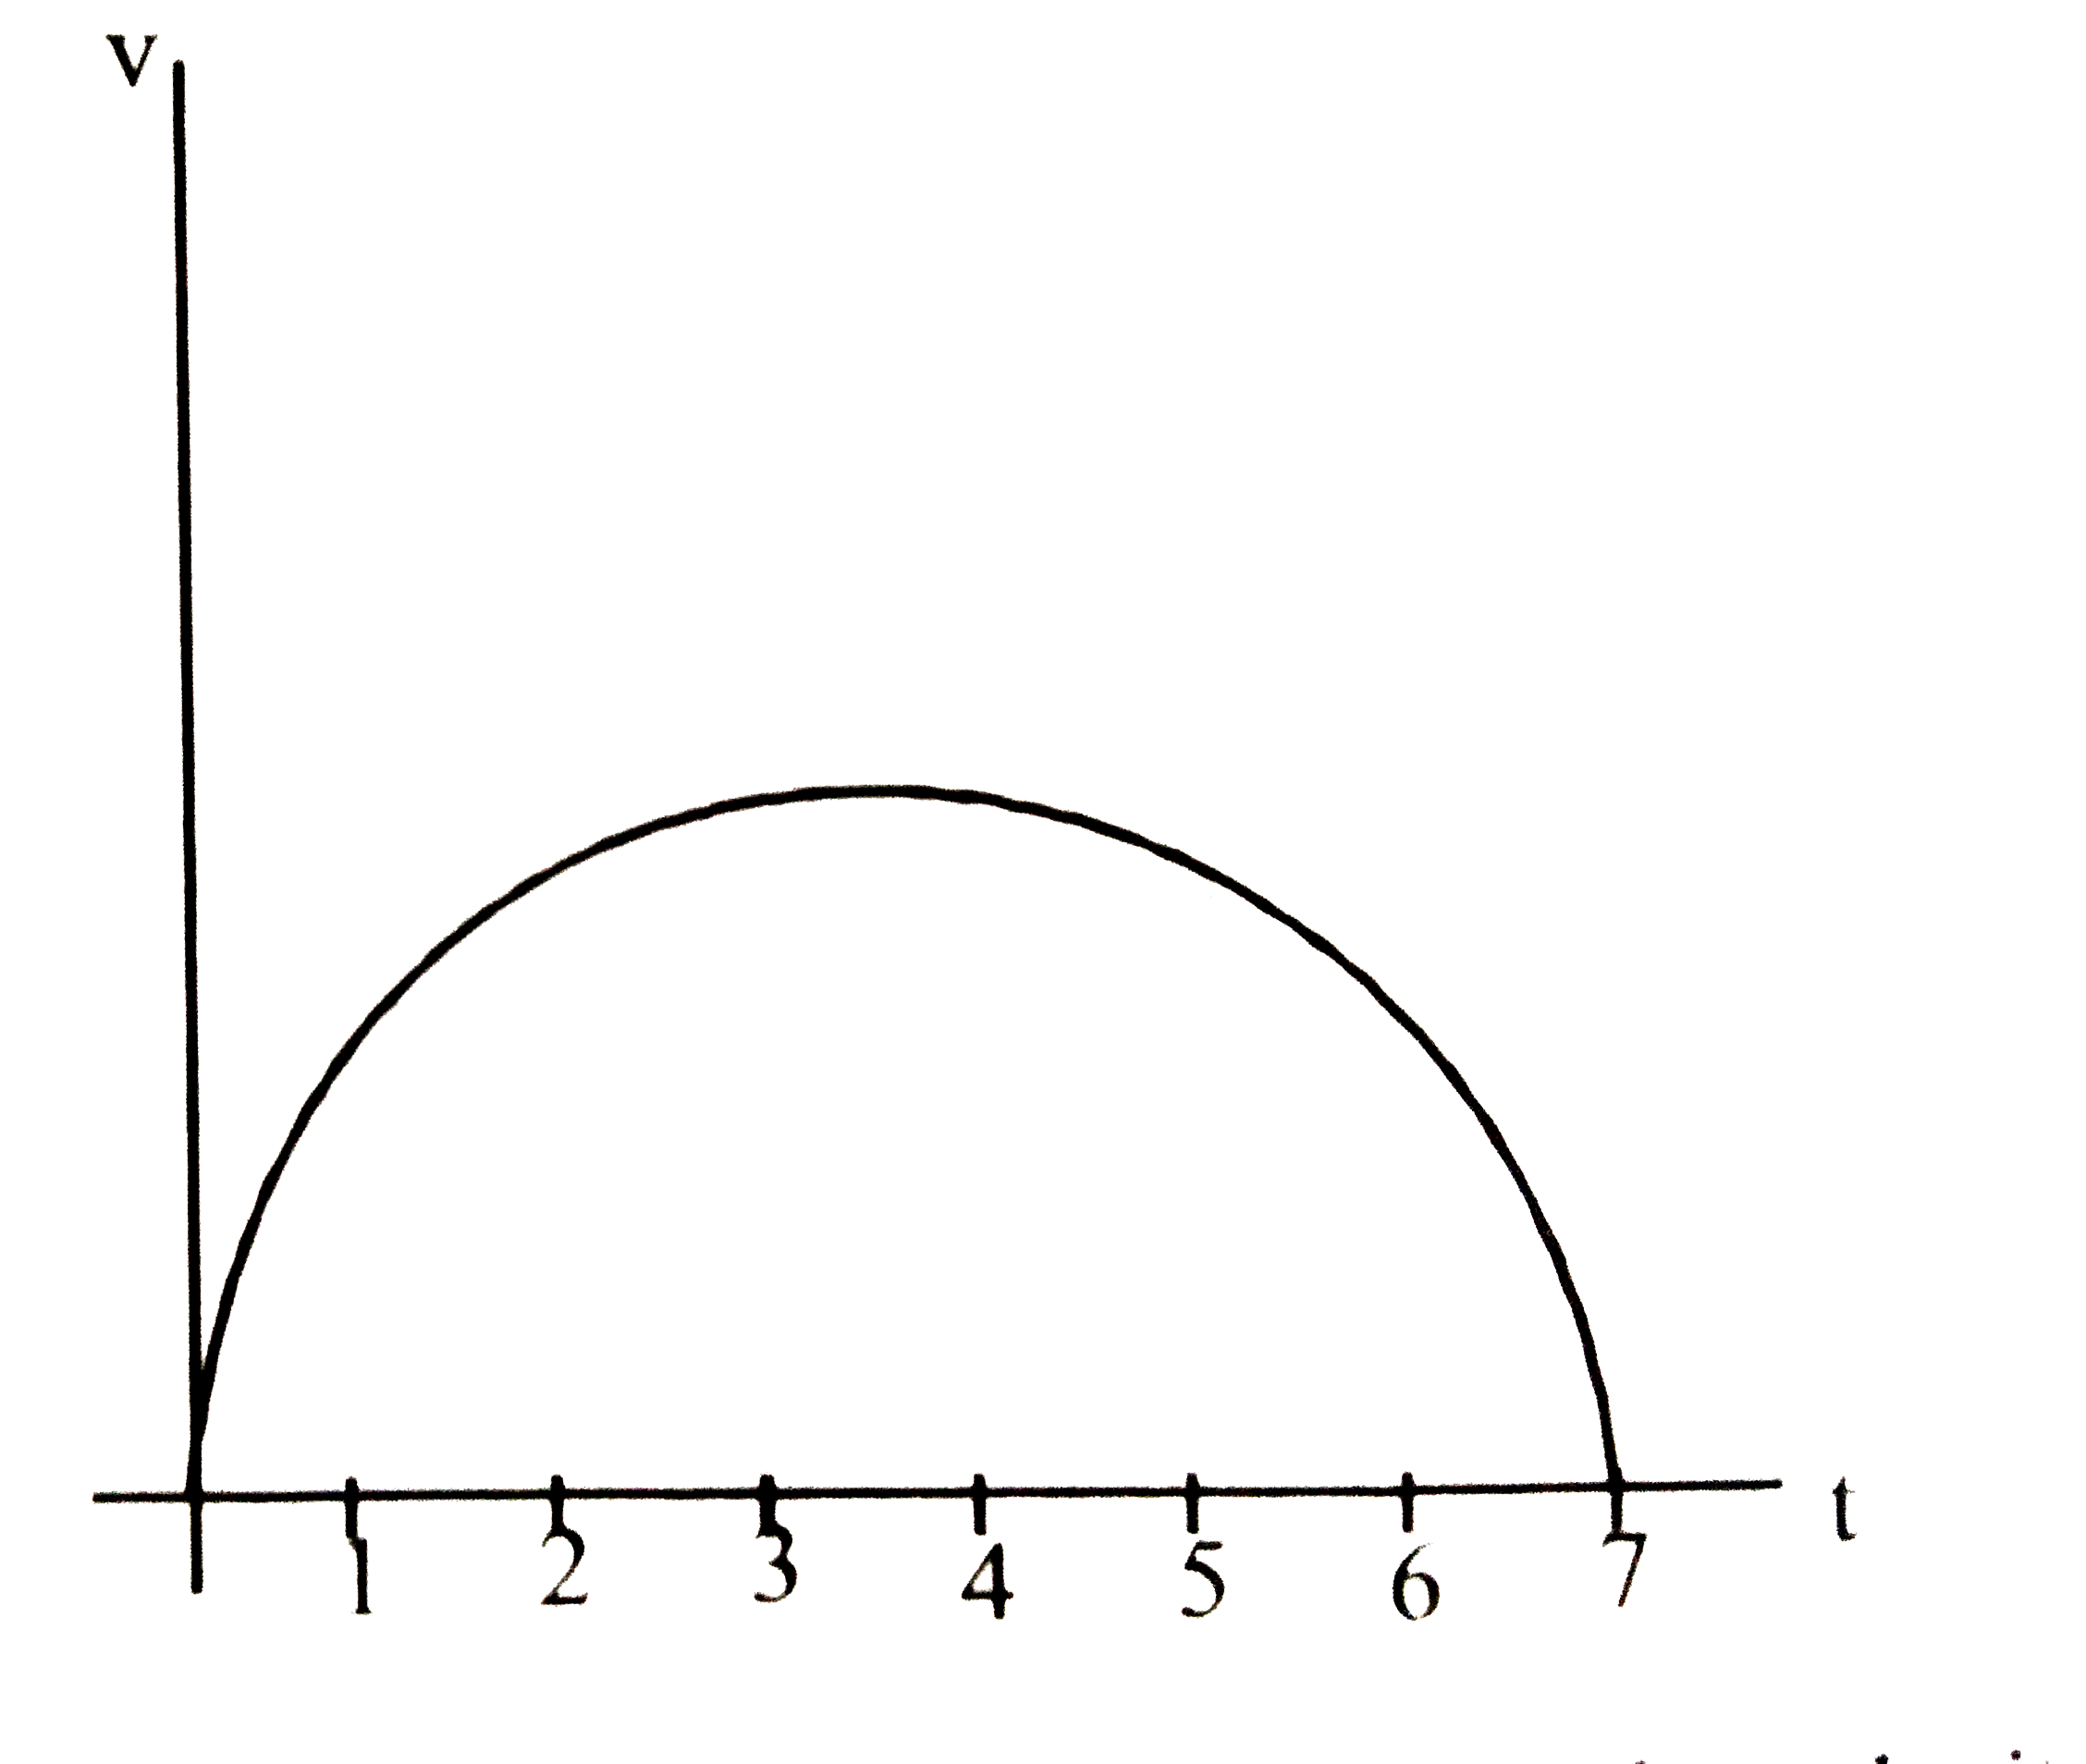 The plot given above represents the velocity of a particle (in mis) with time (in seconds). Assuming that the plot represents a semi-circle, distance traversed by the particle at the end of 7 seconds is approximately.